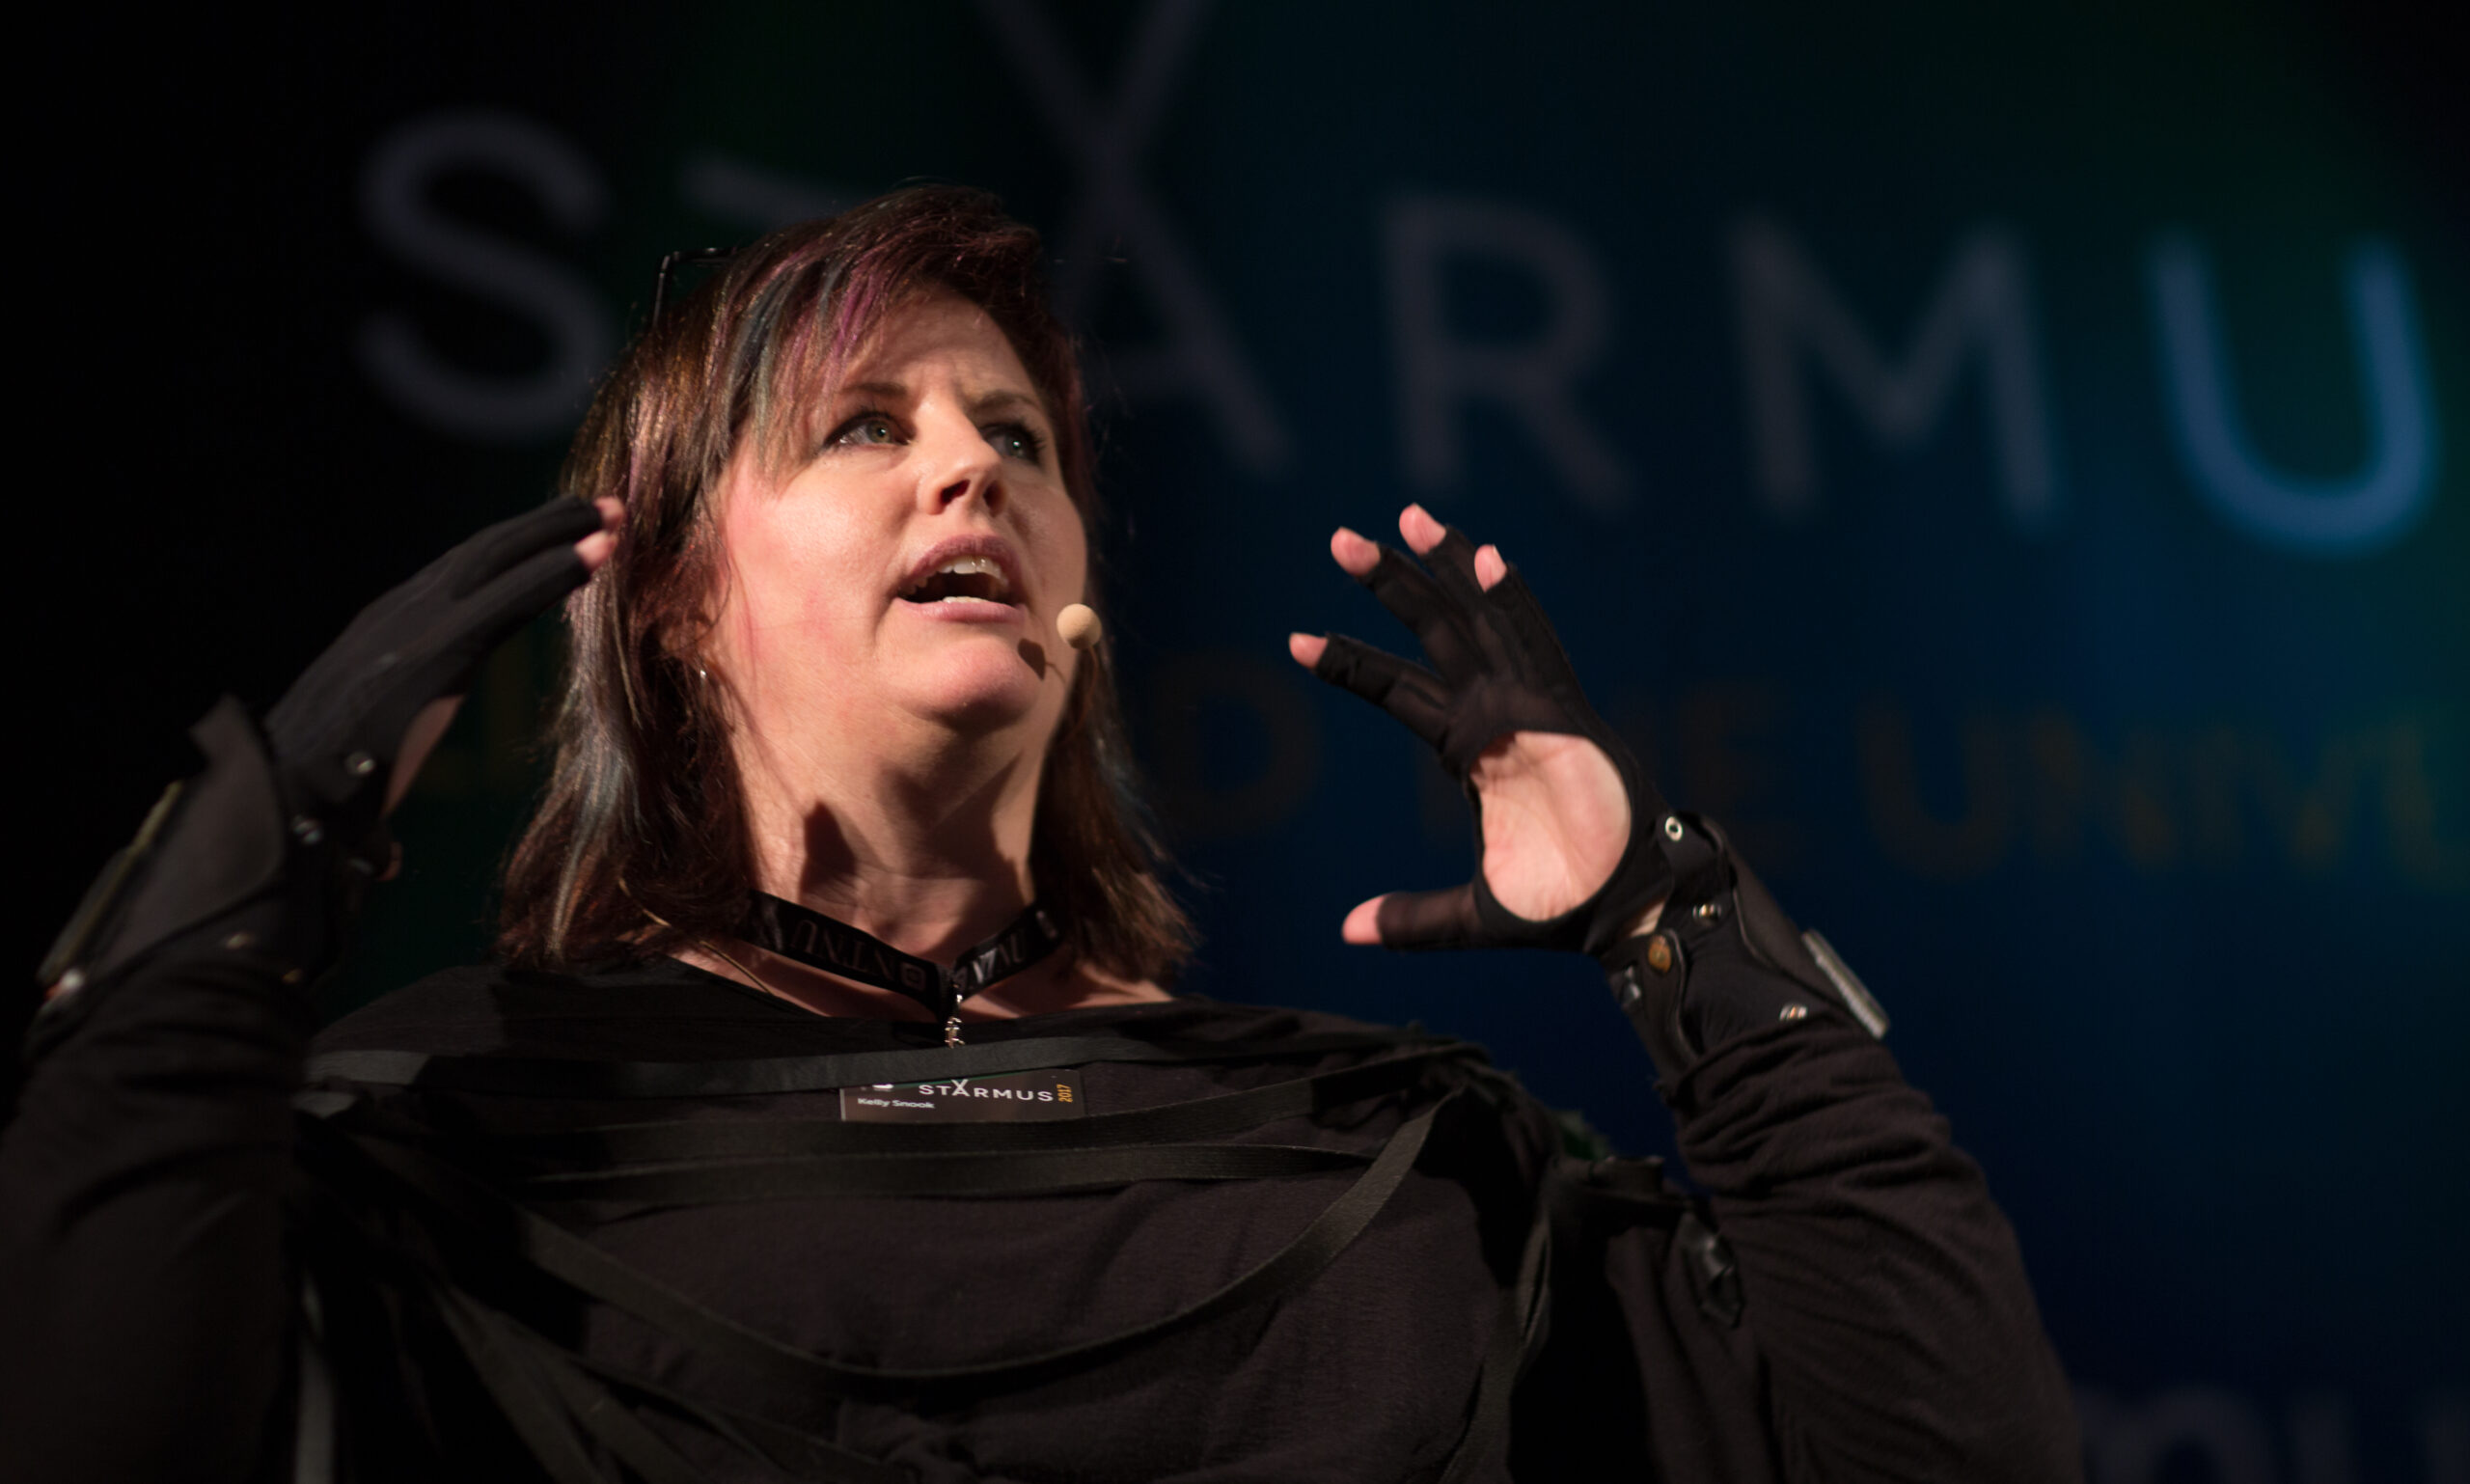 Trondheim 22.06.2017: The science festival Starmus IV at NTNU, Trondheim, Norway.
Interactive demo: THE GLOVES – Wearable tech for musicians. Presented by astrophysicist and music producer Kelly Snook
Photo: Kai T. Dragland / NTNU